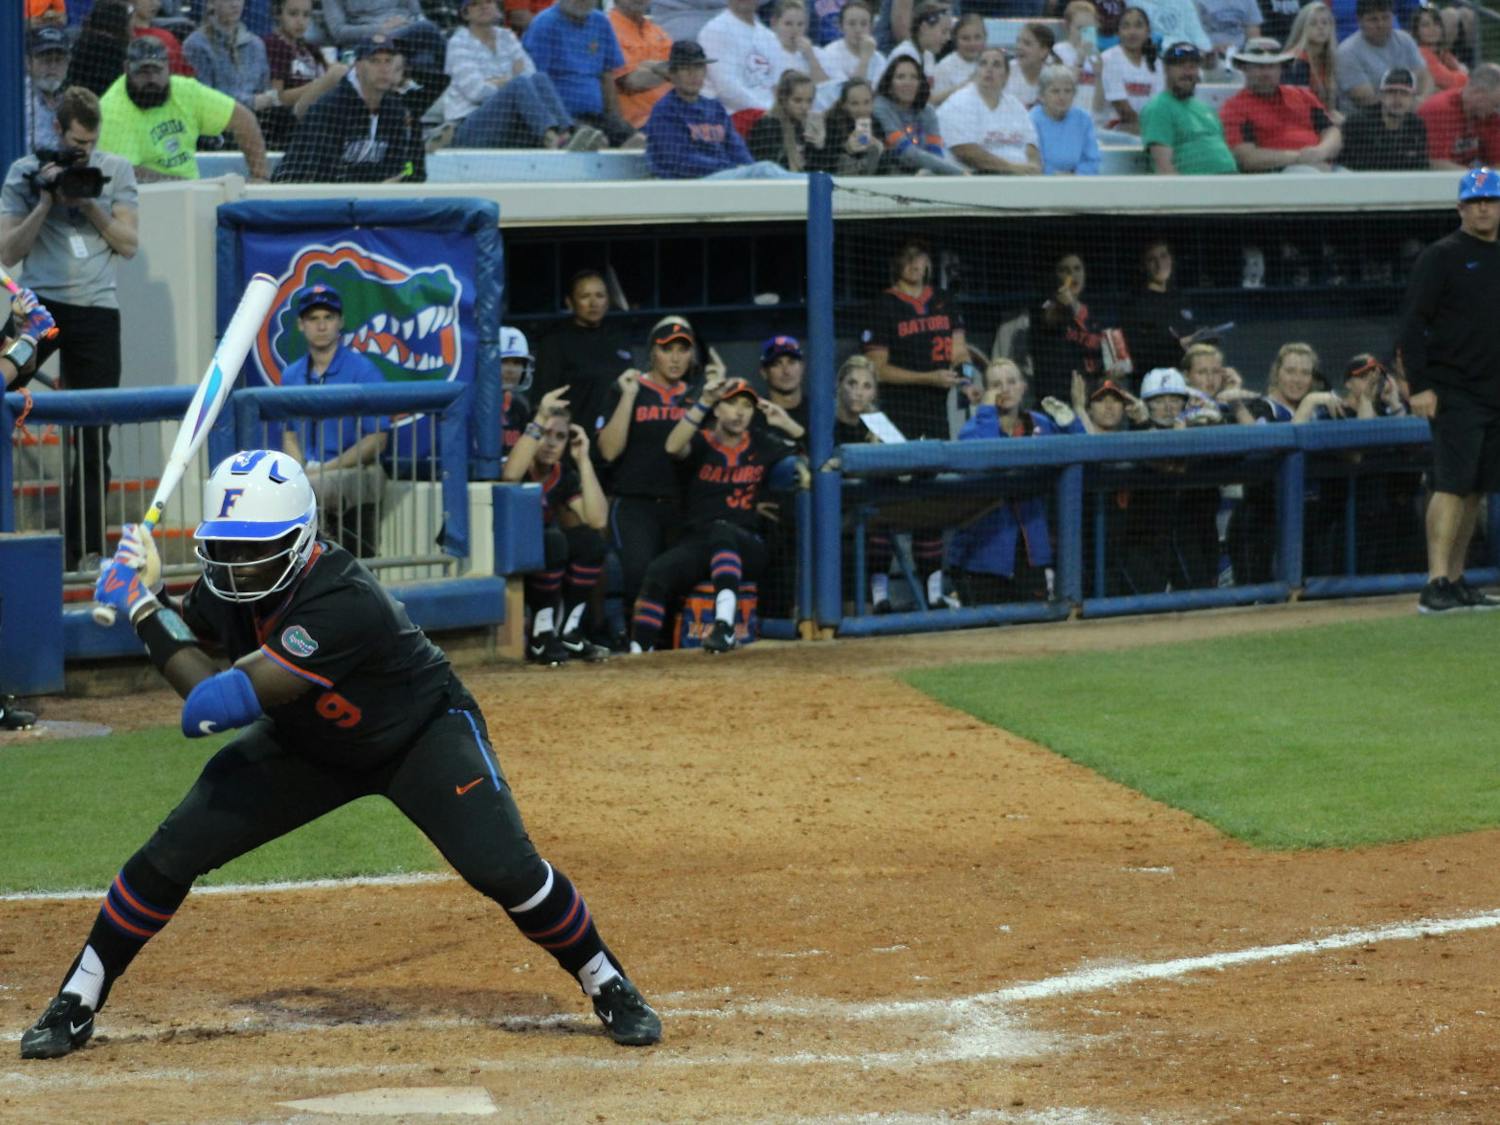 UF third baseman Jaimie Hoover leads the Gators with a .400 batting average this season.